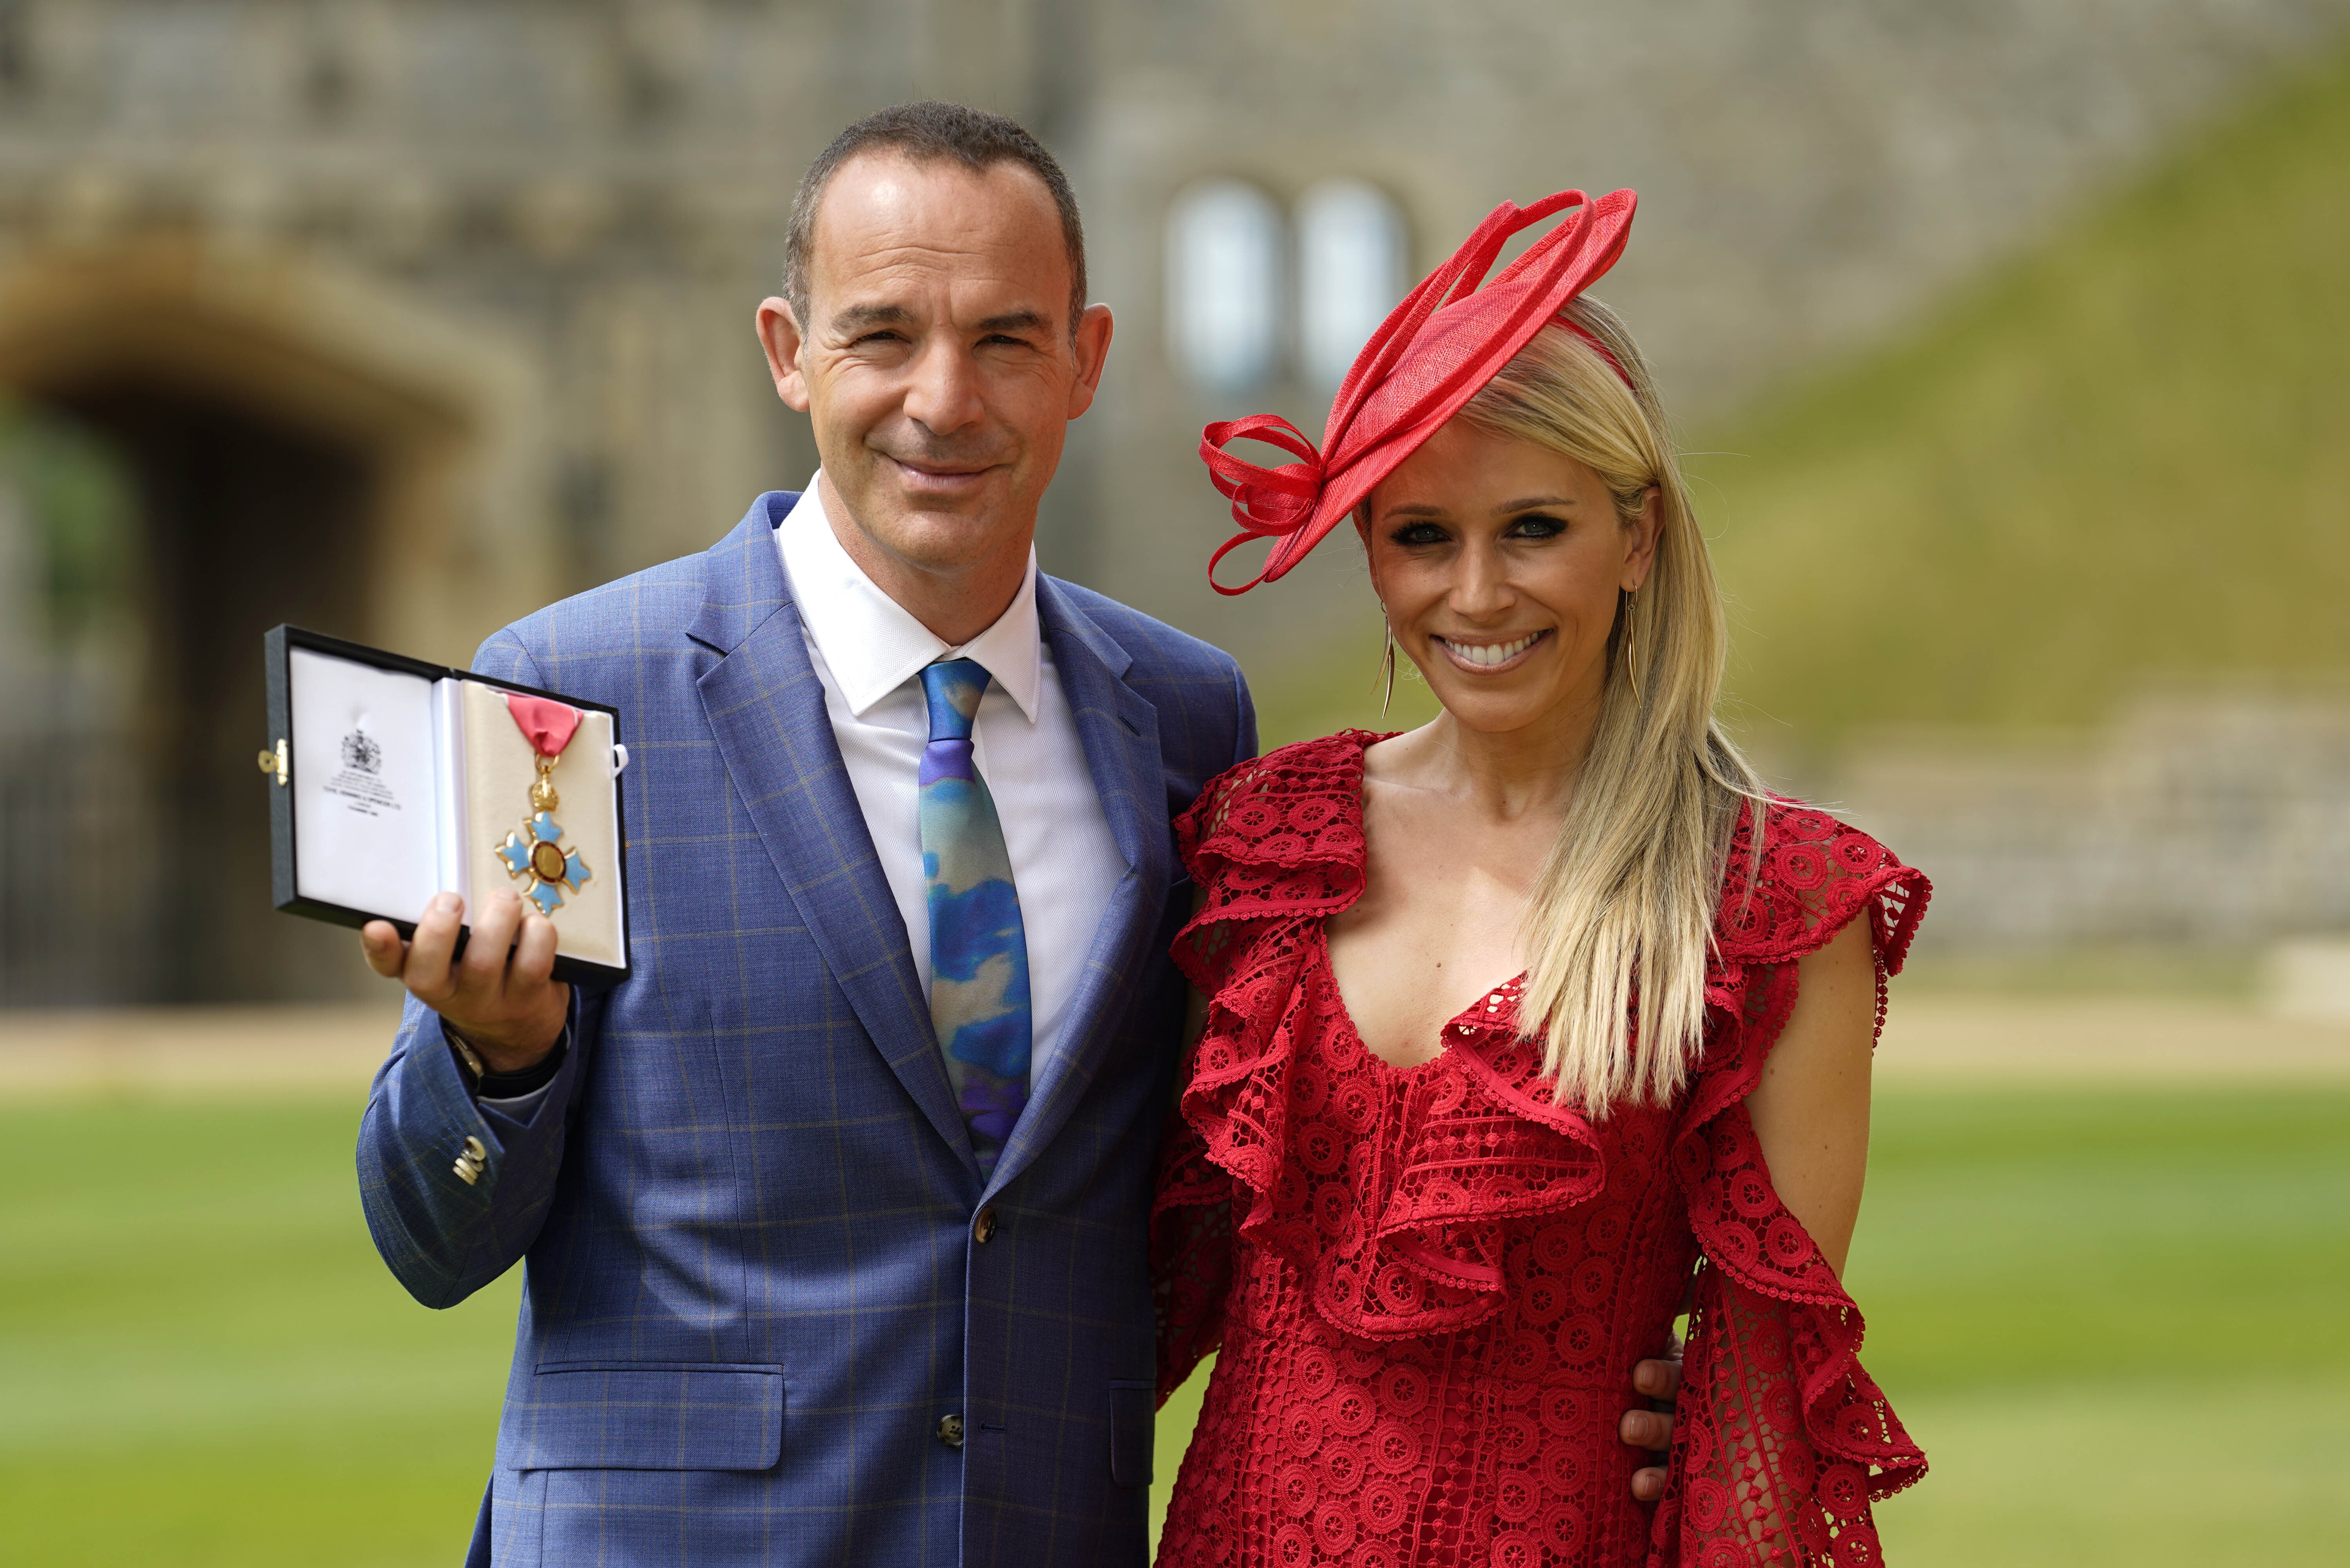 Martin Lewis (pictured with his wife Lara Lewington) was awarded a CBE earlier this year